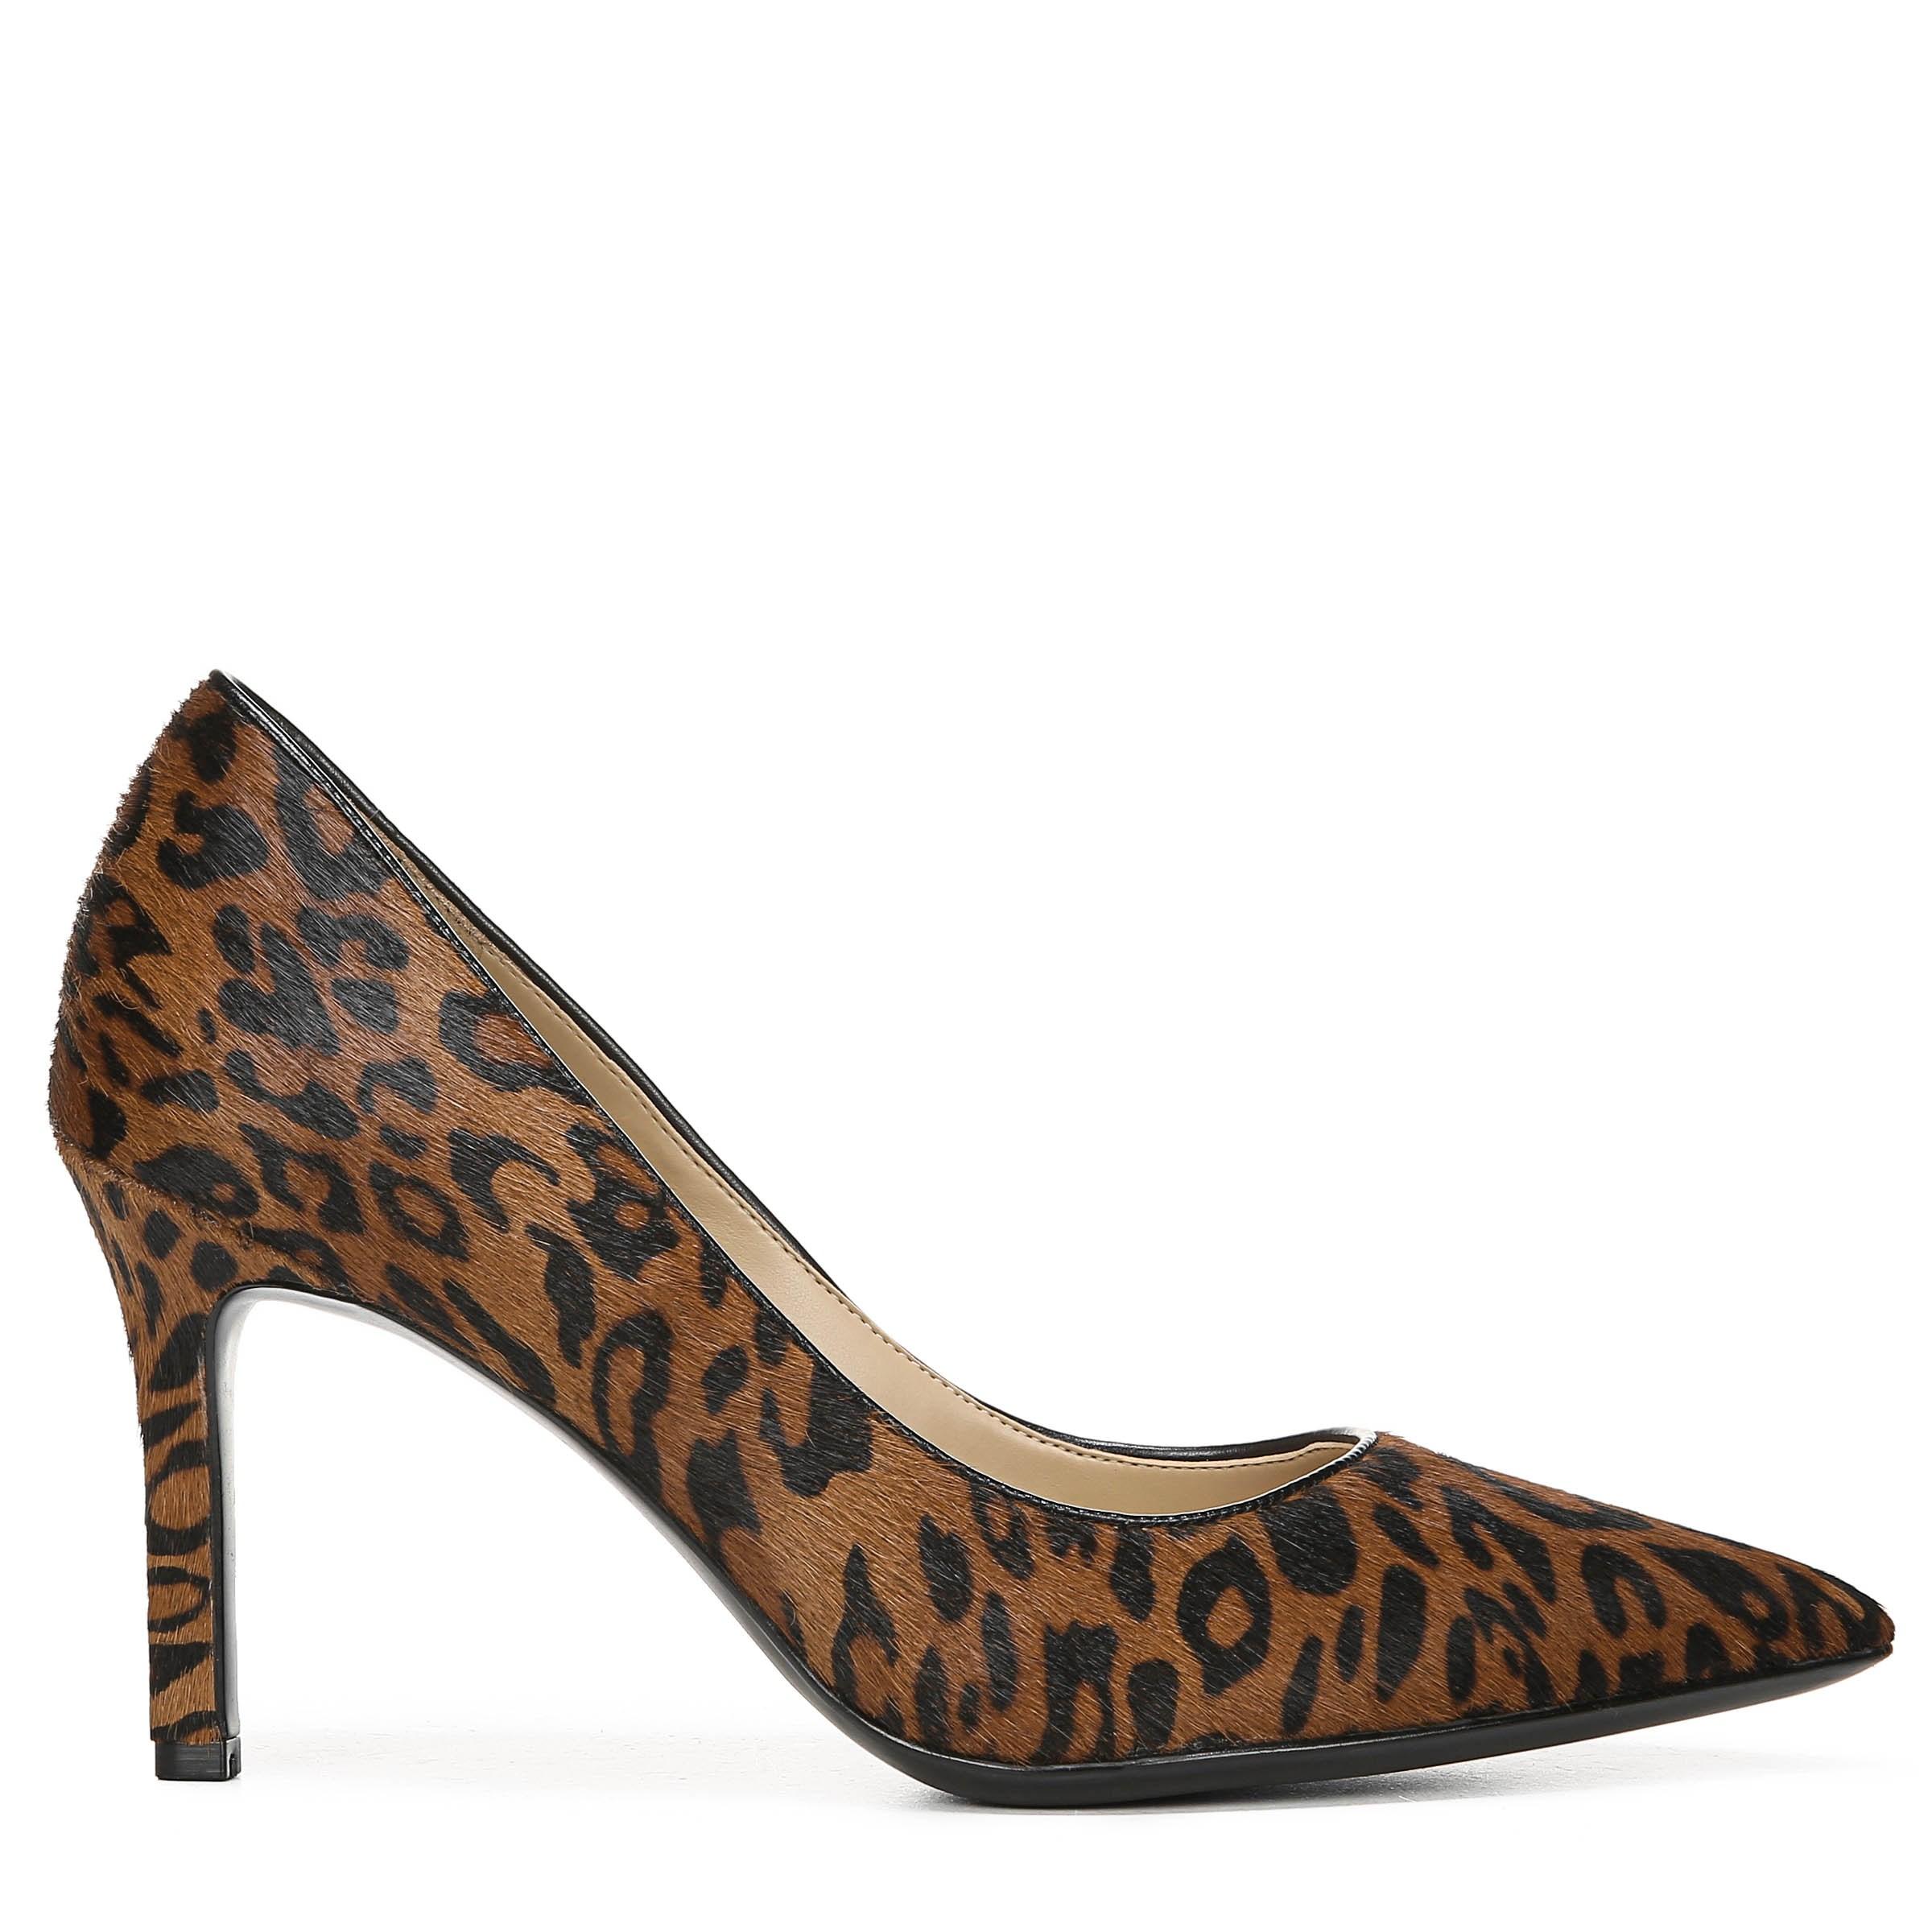 Naturalizer Leather Anna Pumps in Cheetah Print (Brown) - Save 24% - Lyst